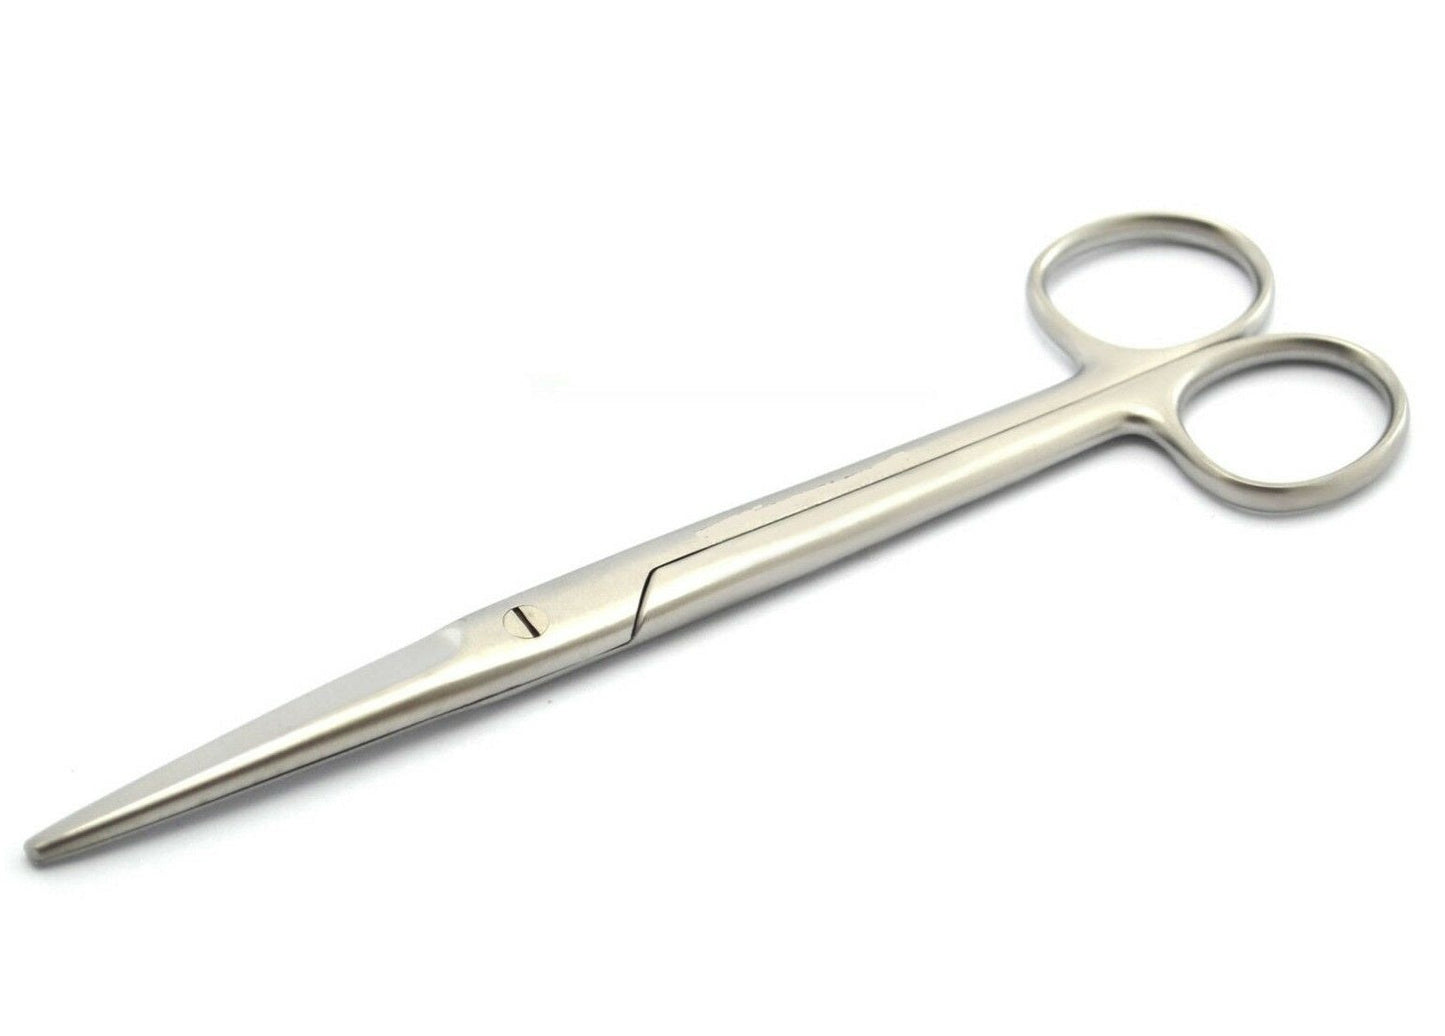 Gold Handle Mayo Dissecting Blunt Scissors 6.75", Straight